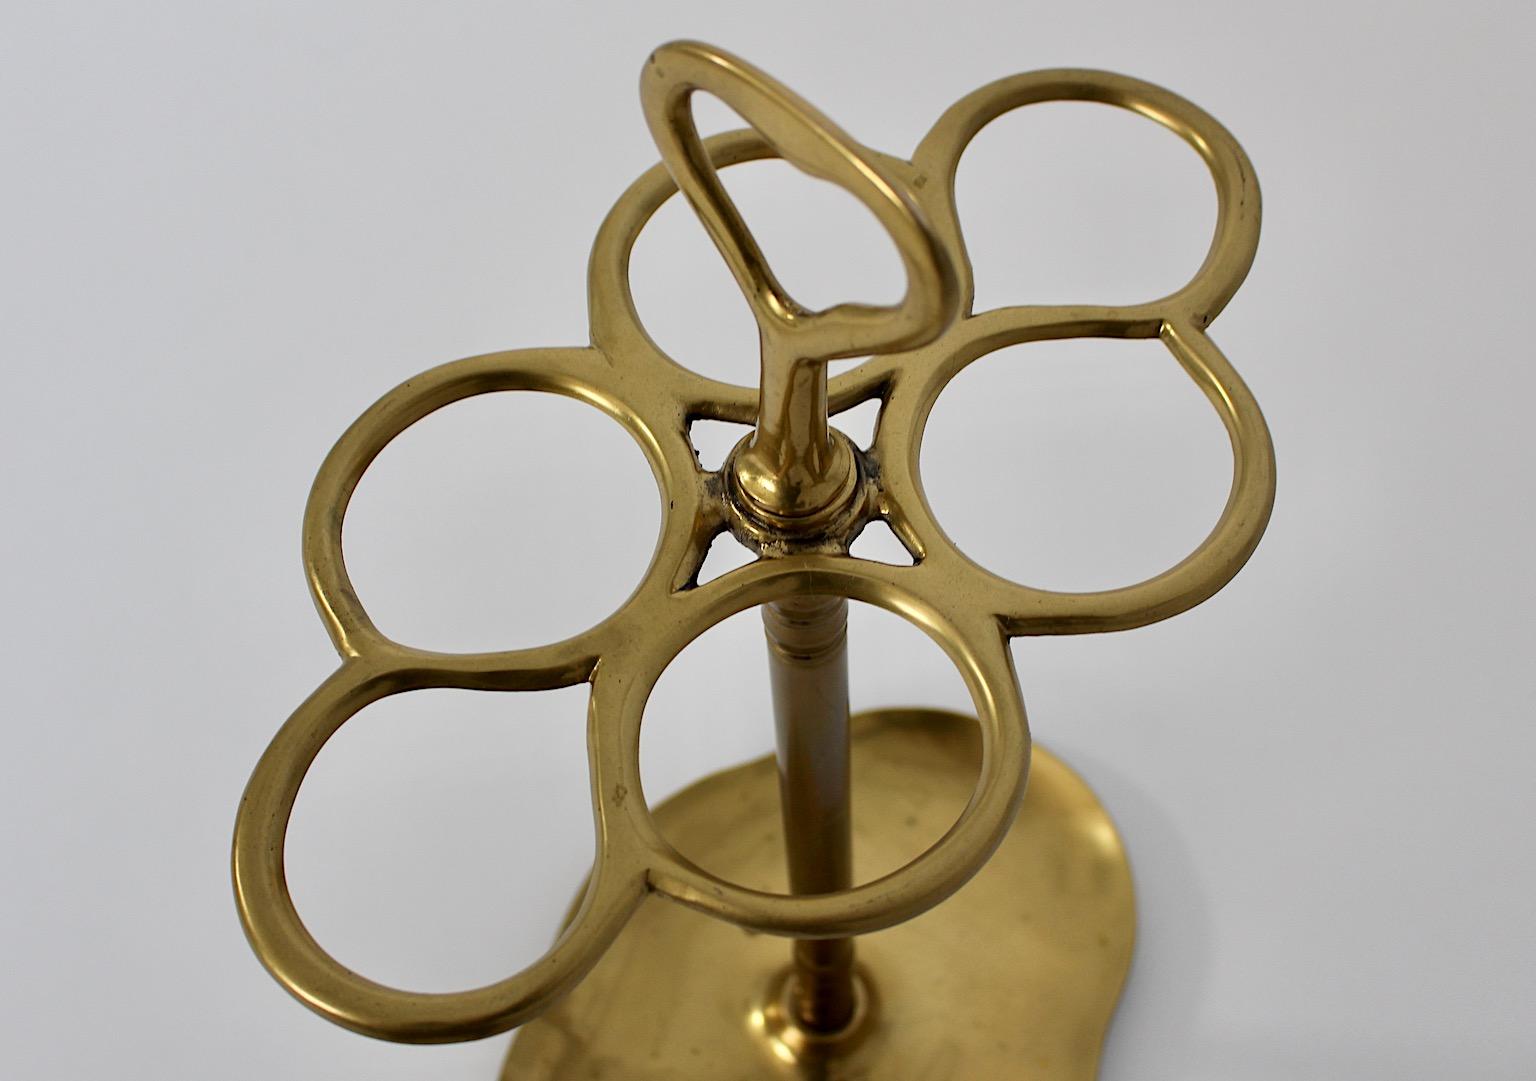 20th Century Hollywood Regency Style Vintage Brass Umbrella Stand Cane Holder 1970s Italy For Sale